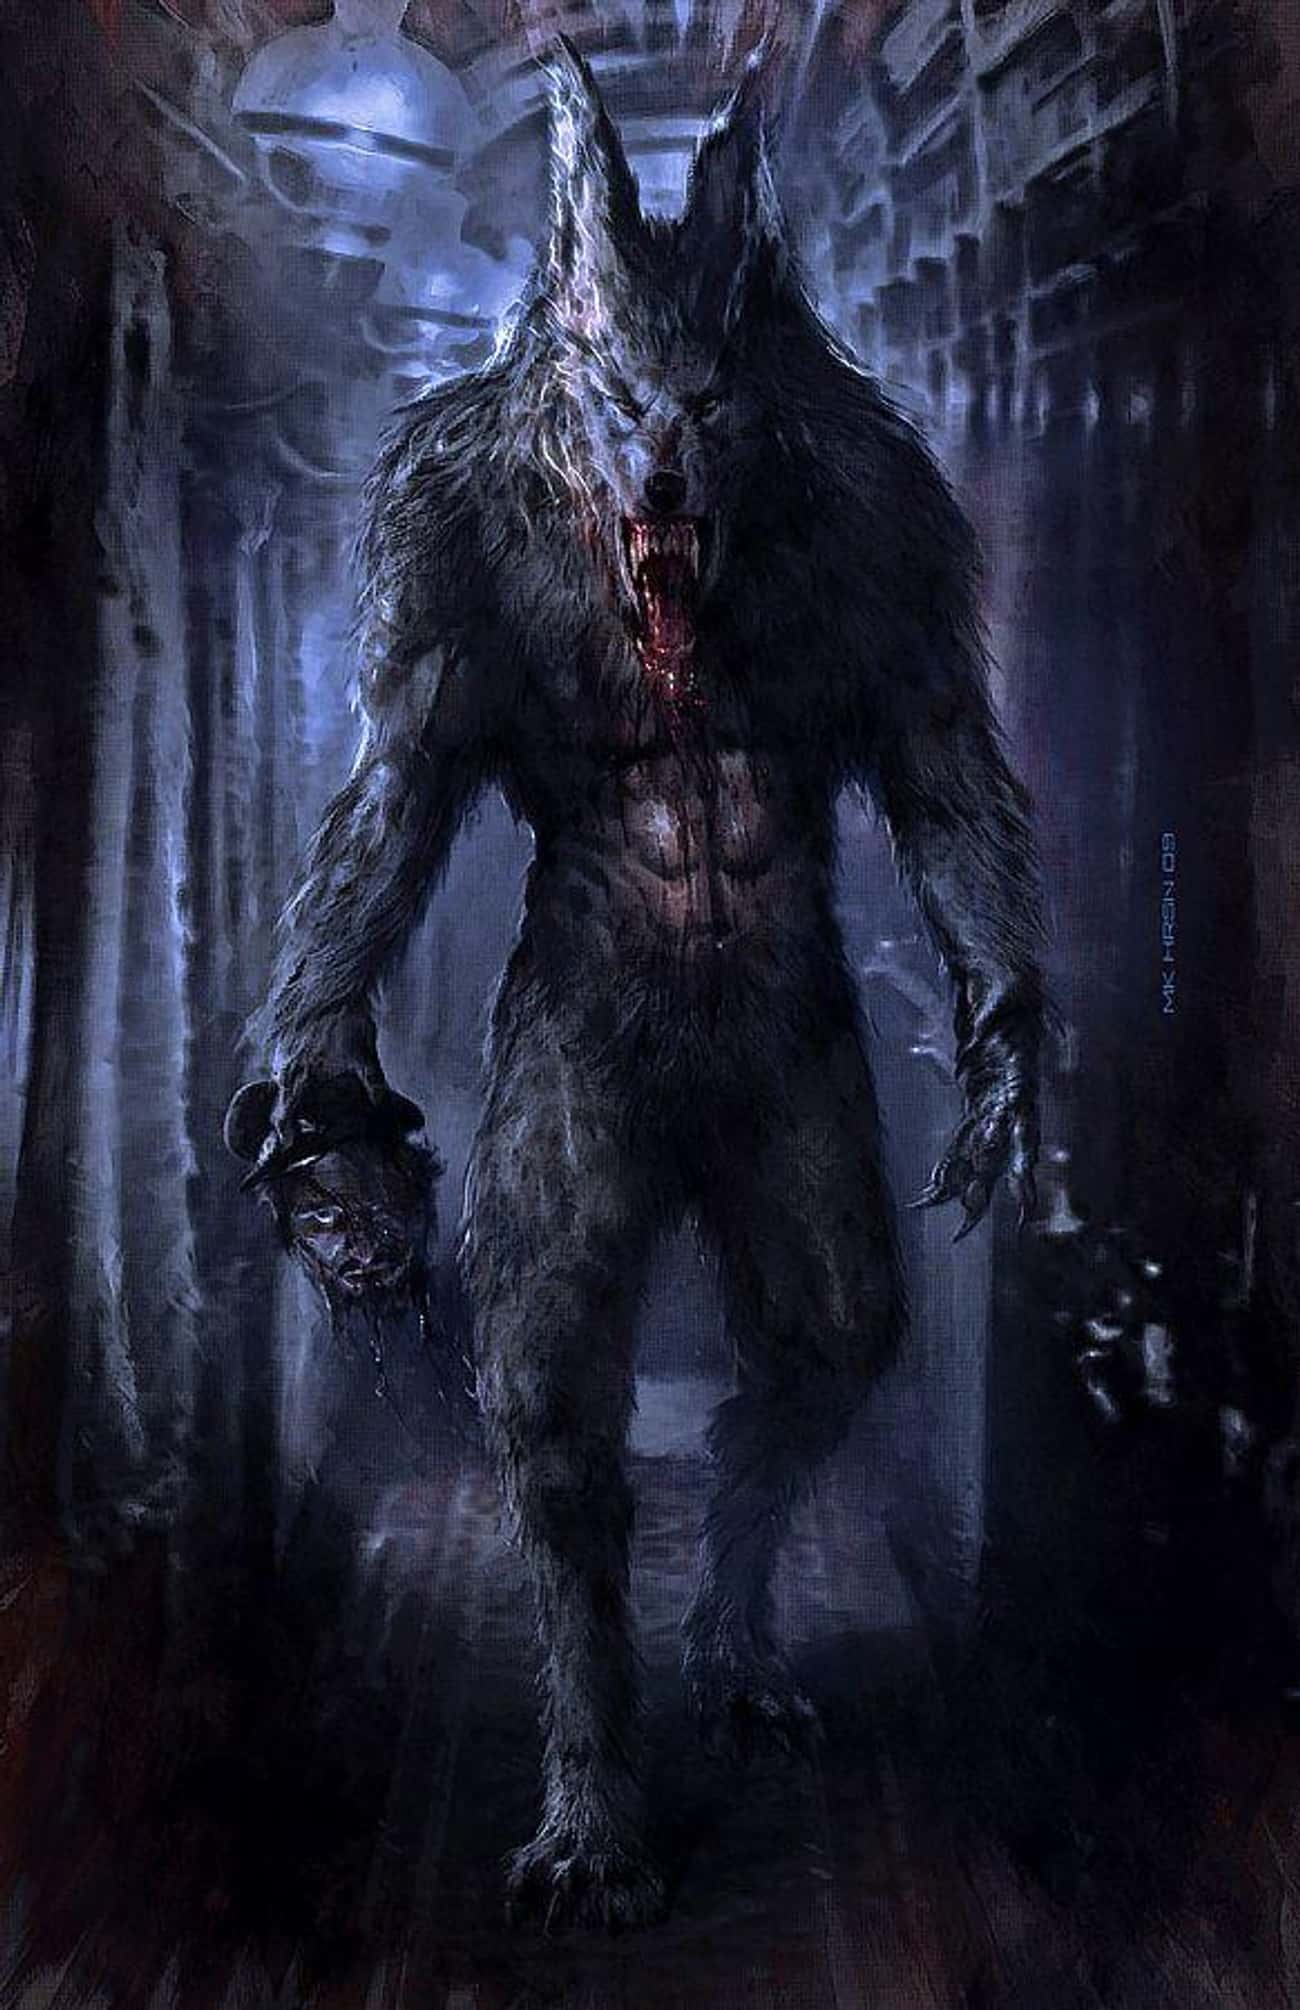 A Woman Claimed To Have Seen A Werewolf In Front Of Her Home